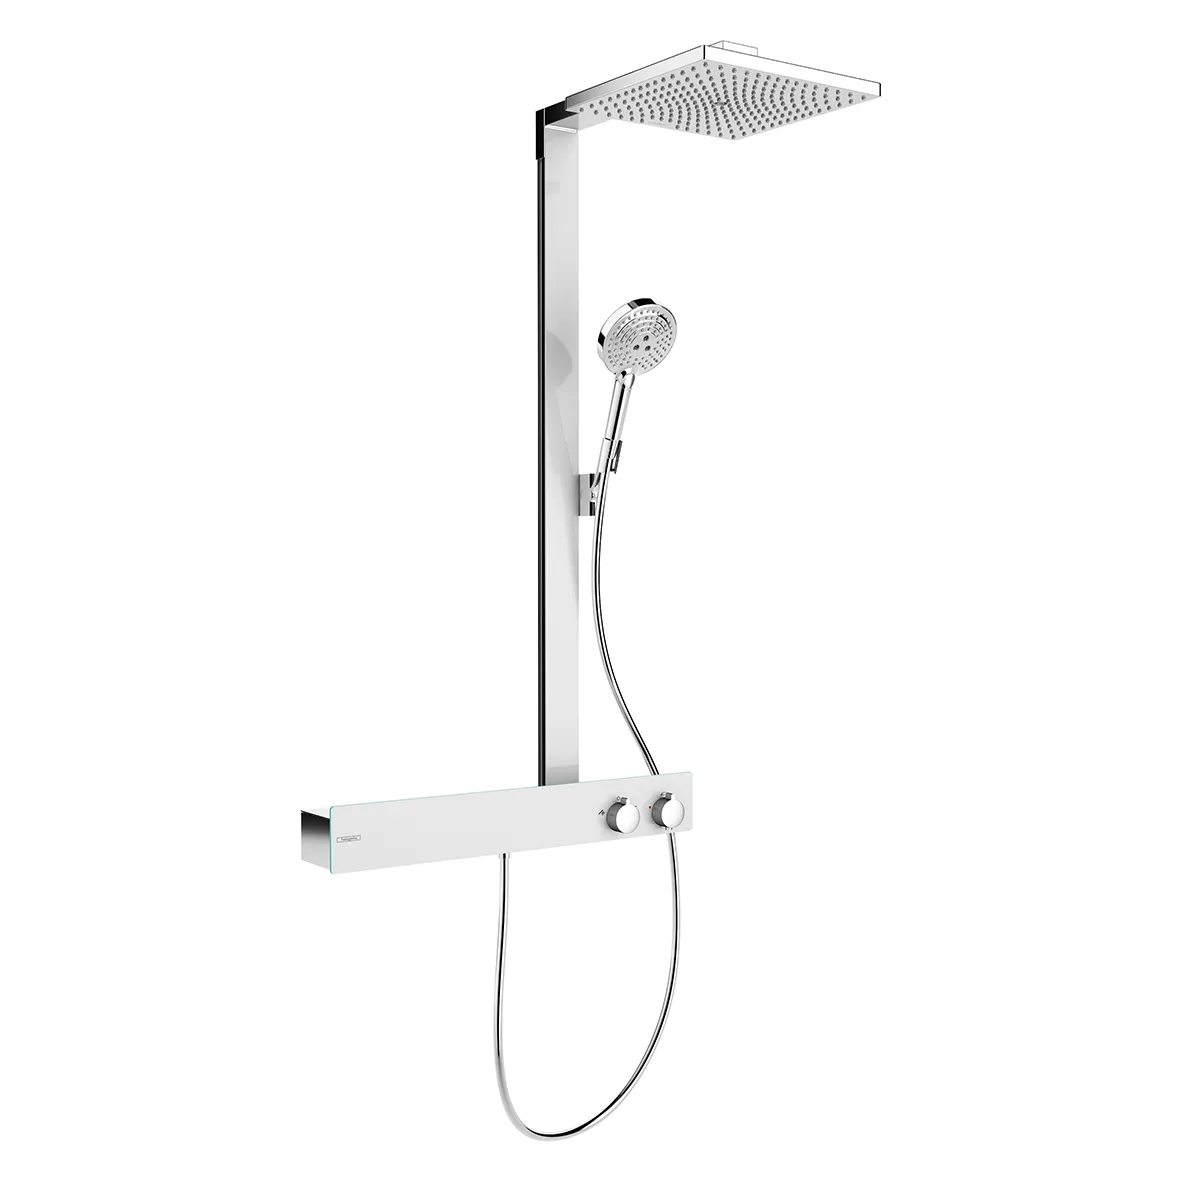 Bathroom – raindance-e-showerpipe-300-with-shower-tablet-600-by-hansgrohe